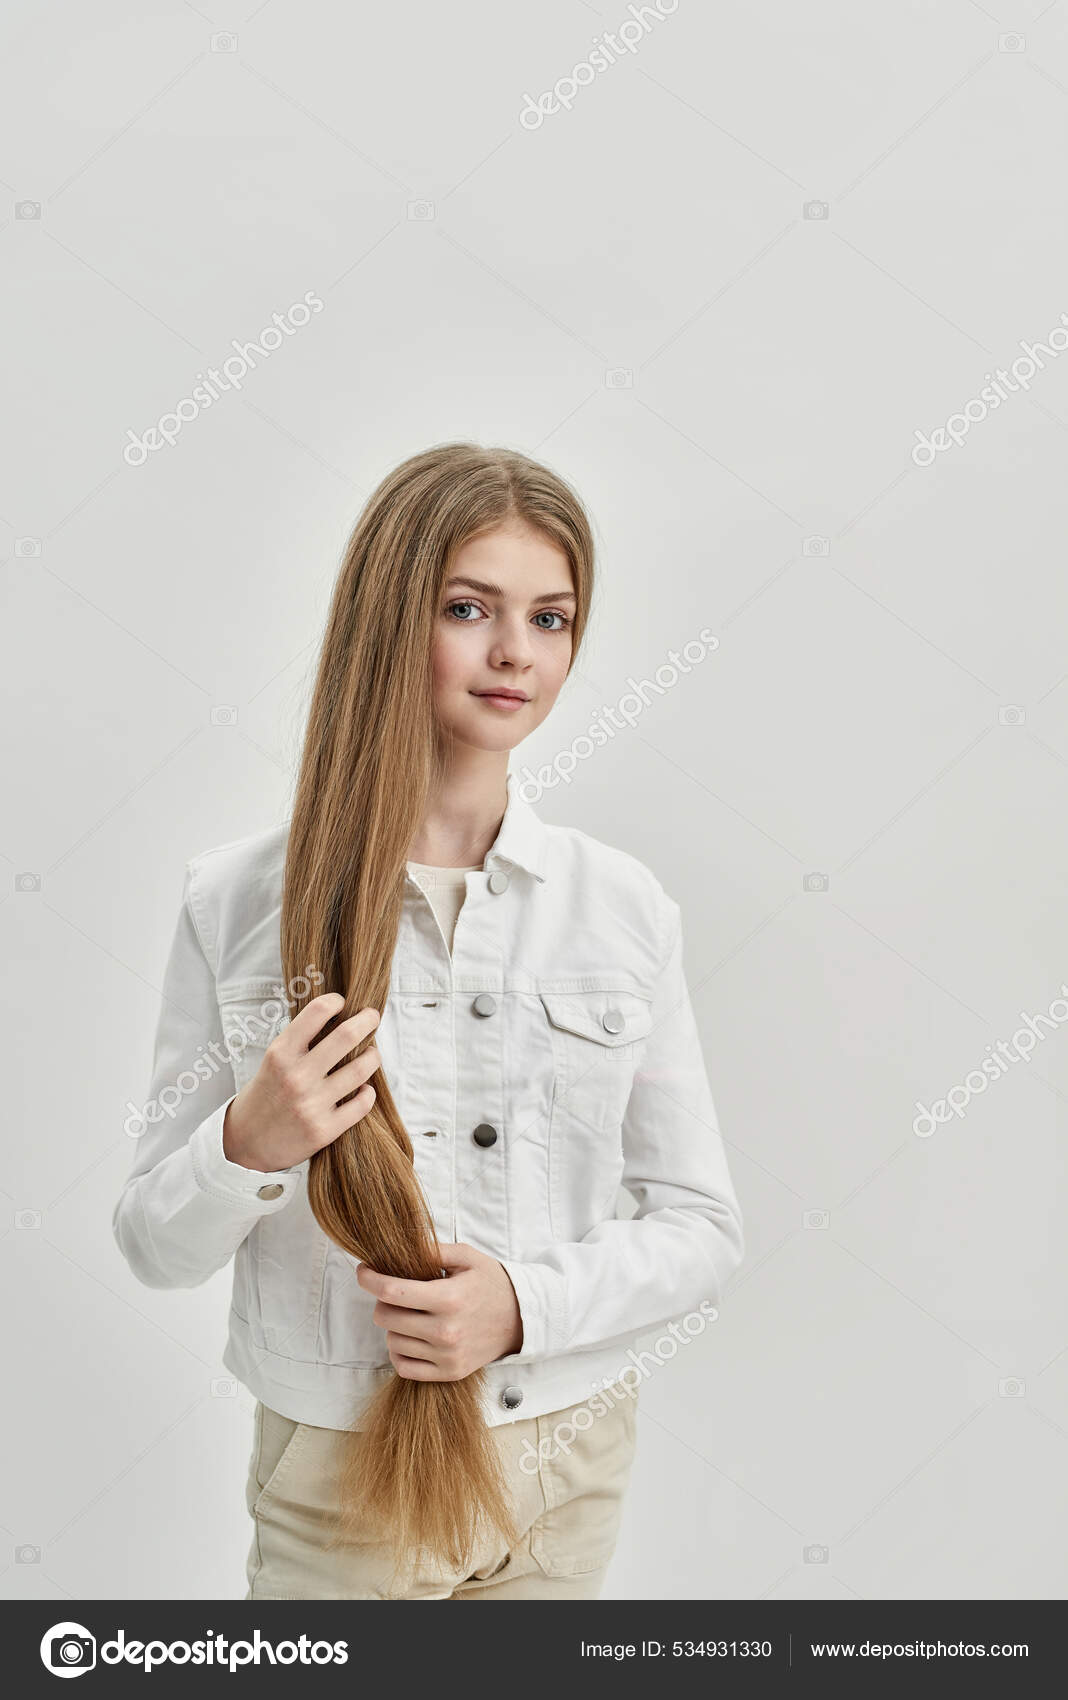 Cute teenage girl with thick long hair. Portrait of Caucasian